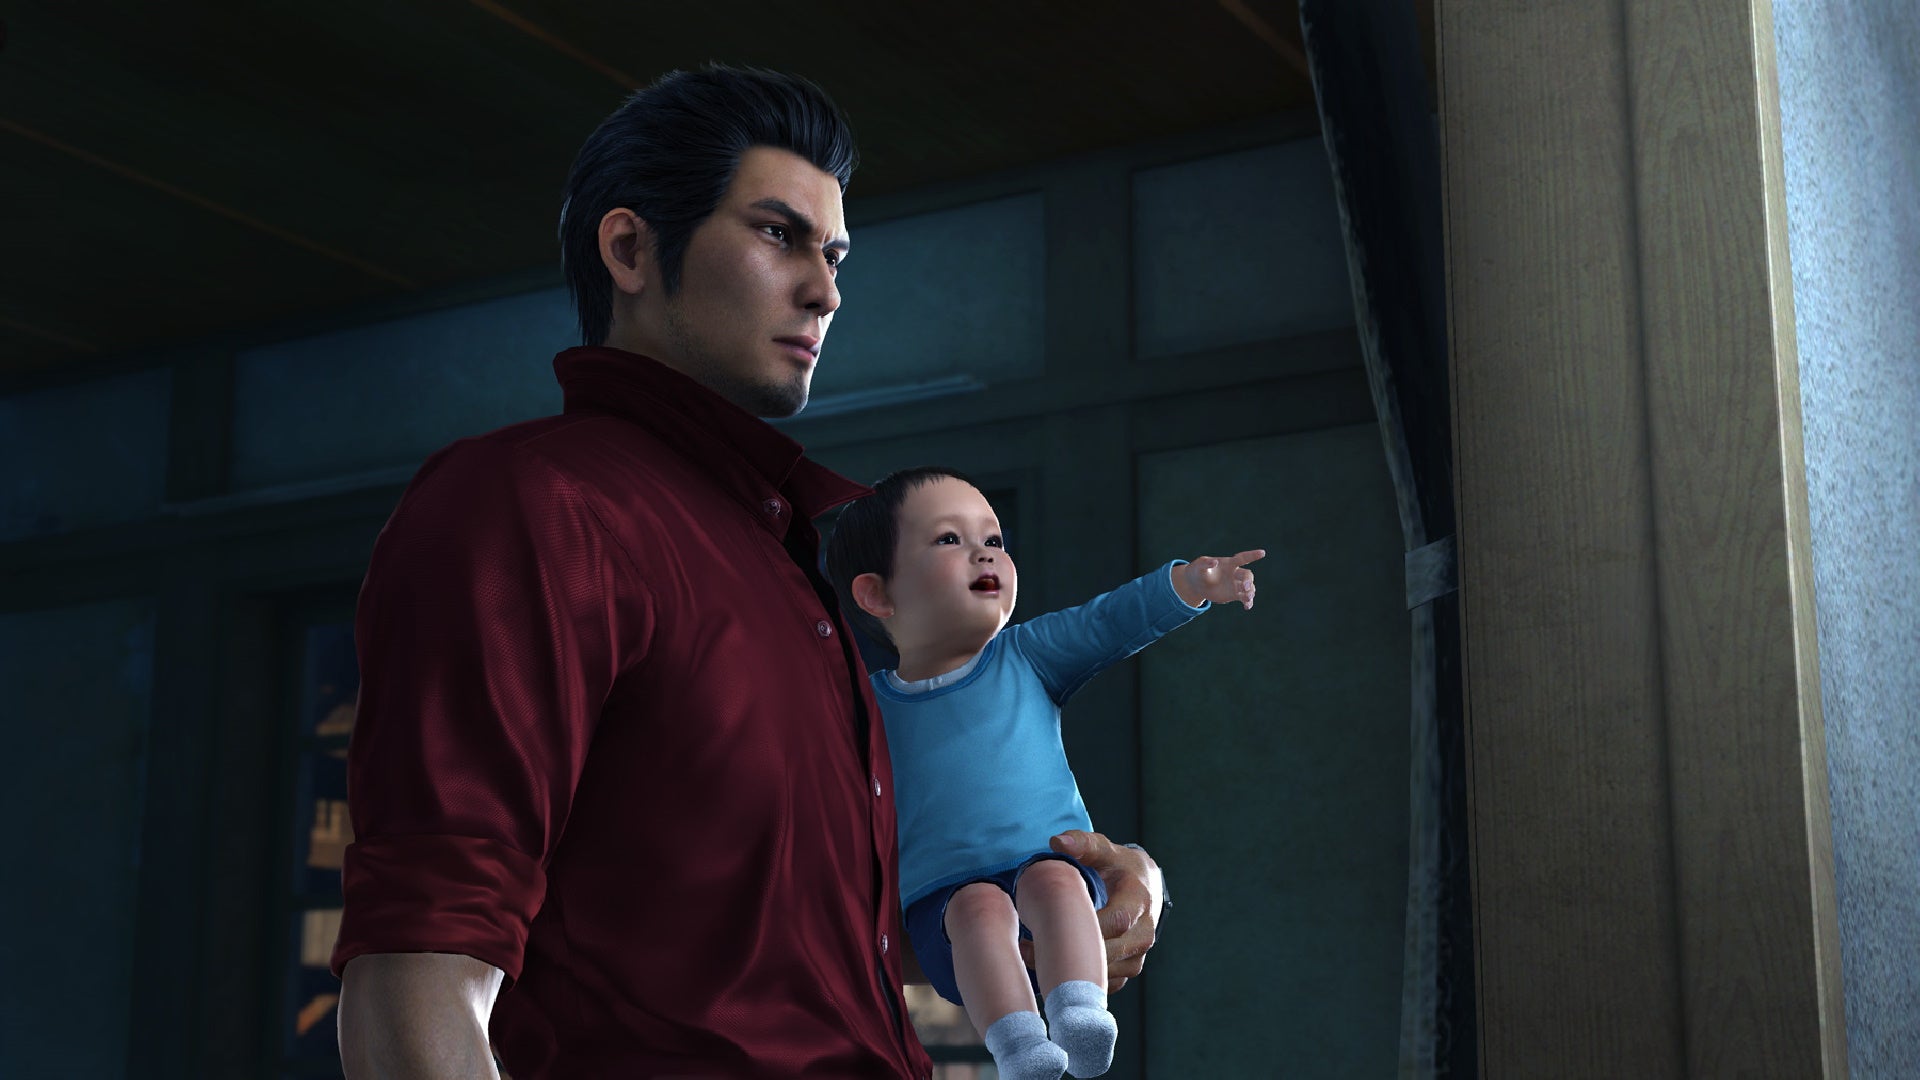 Kiryu cradles baby Haruto in his arms, as Haruto giggles and points out of a window in Yakuza 6.